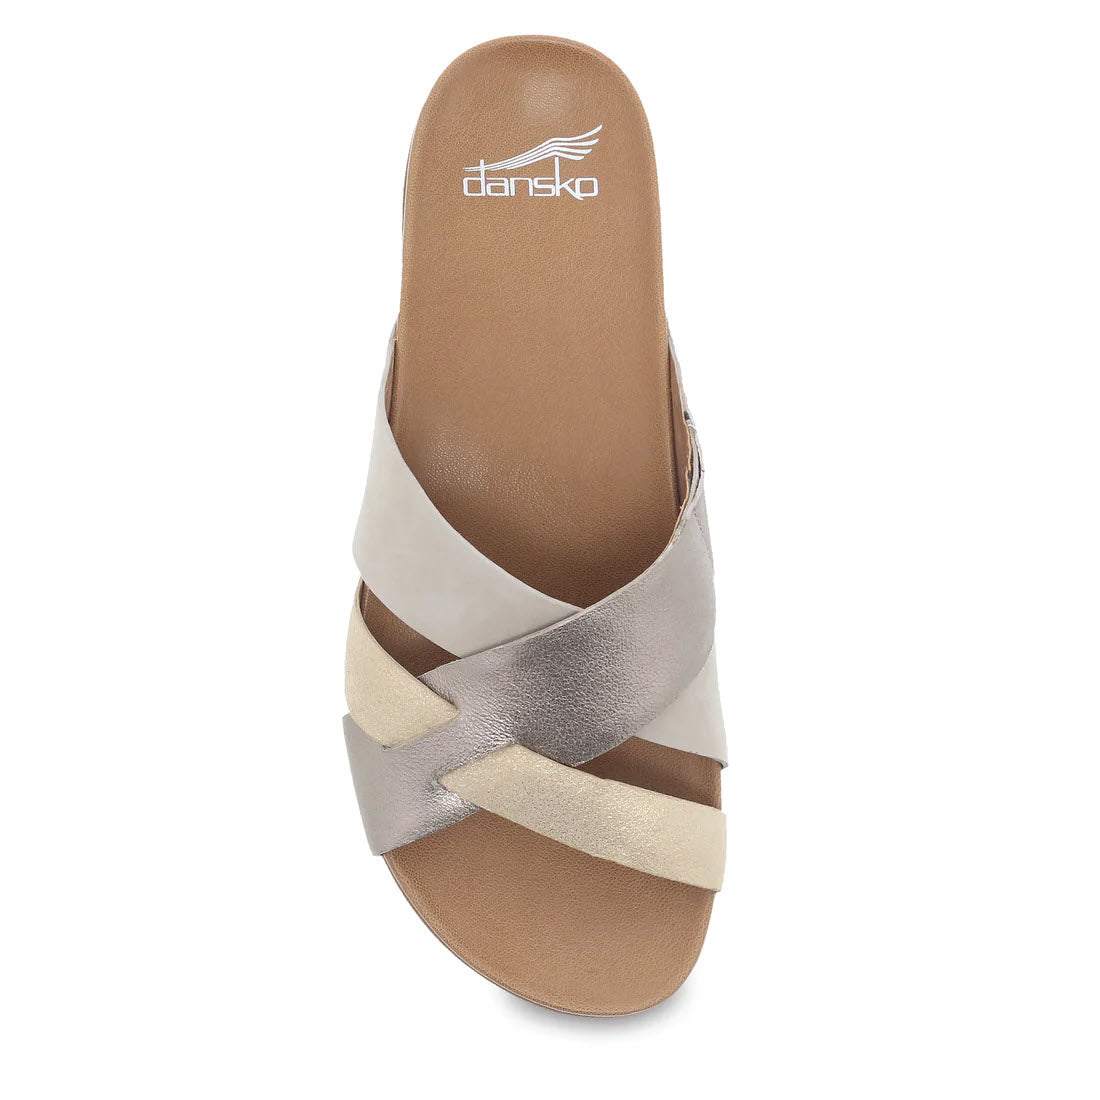 A top-down view of a Dansko Joanna Sand Multi - Womens sandal, featuring crisscrossed beige and silver leather uppers on a brown footbed.